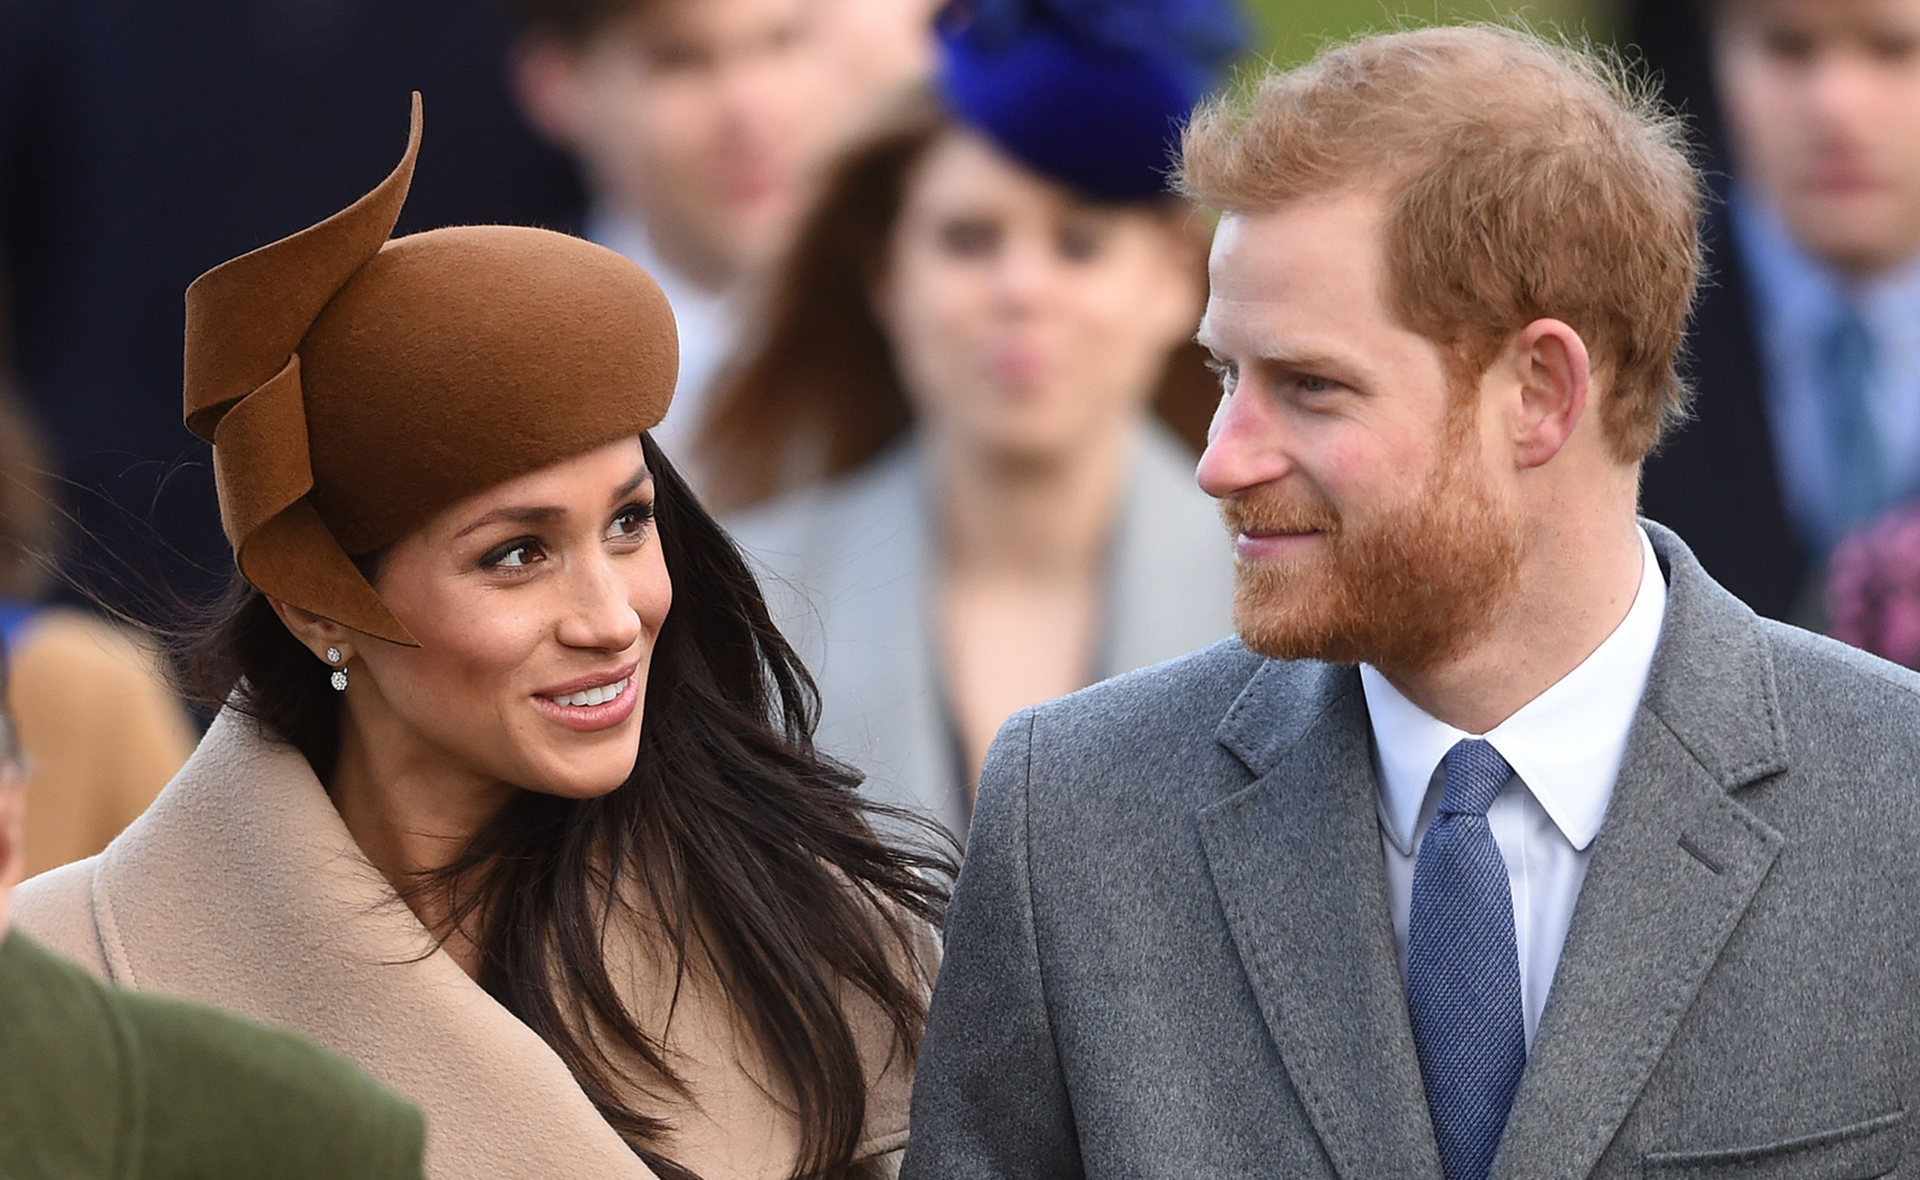 When will we see Lilibet? The huge hint Prince Harry and Meghan Markle are about to release her first photo